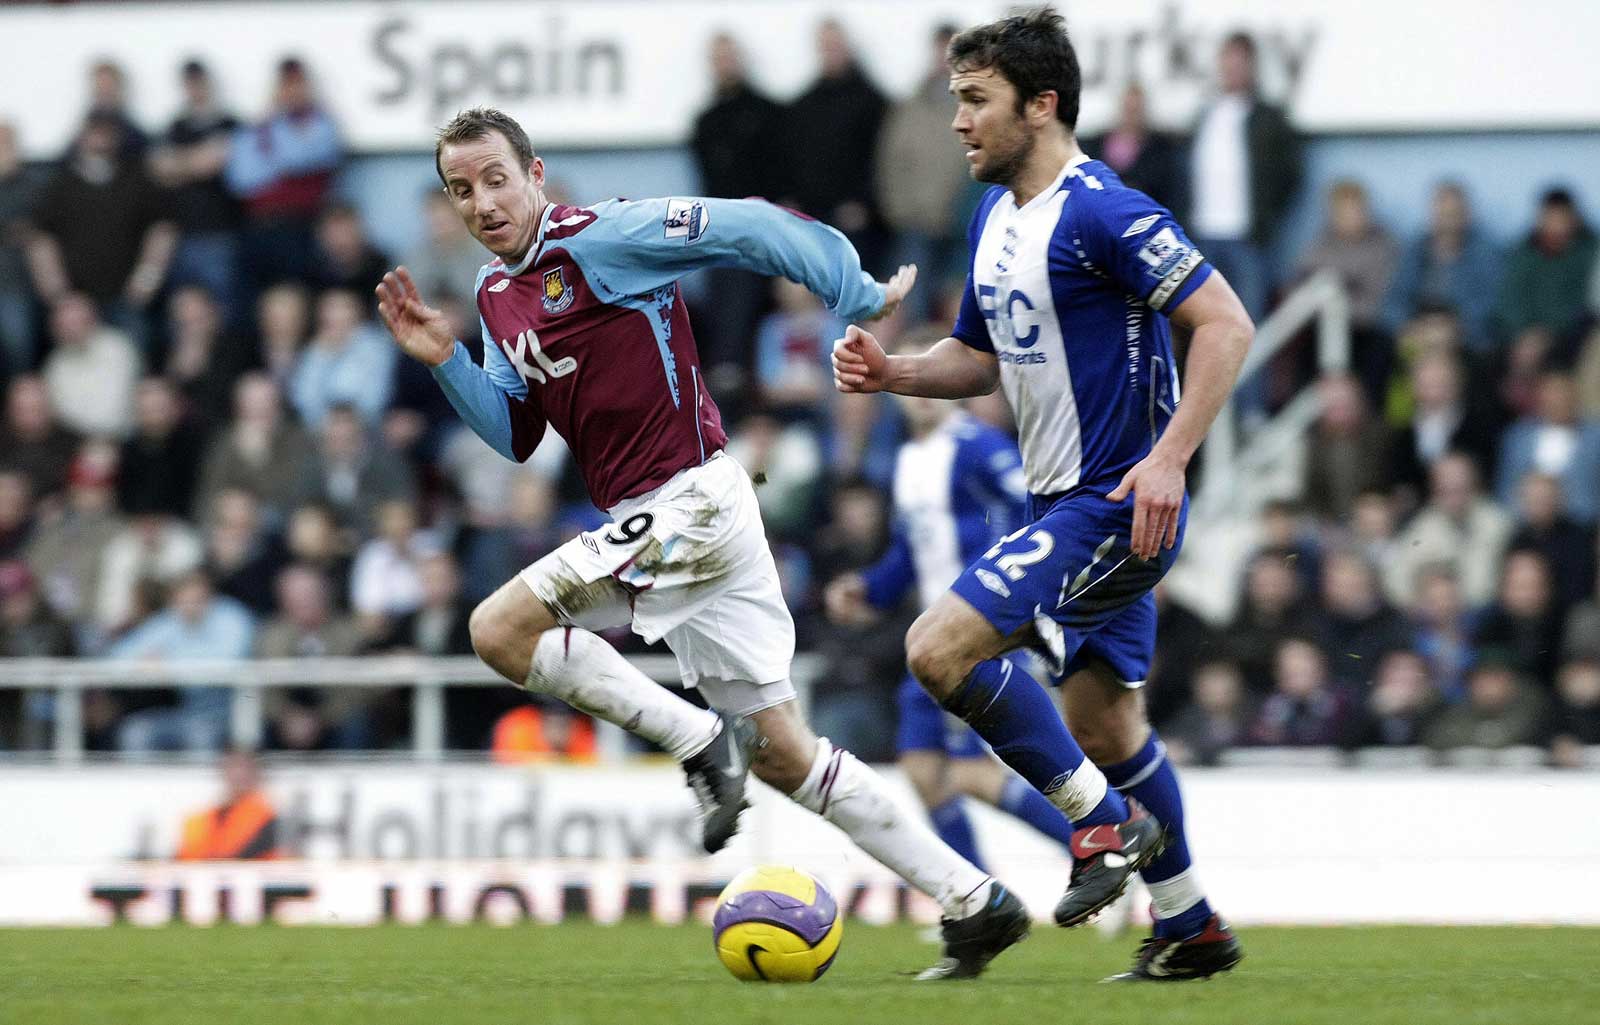 Lee Bowyer in action for West Ham against Birmingham City